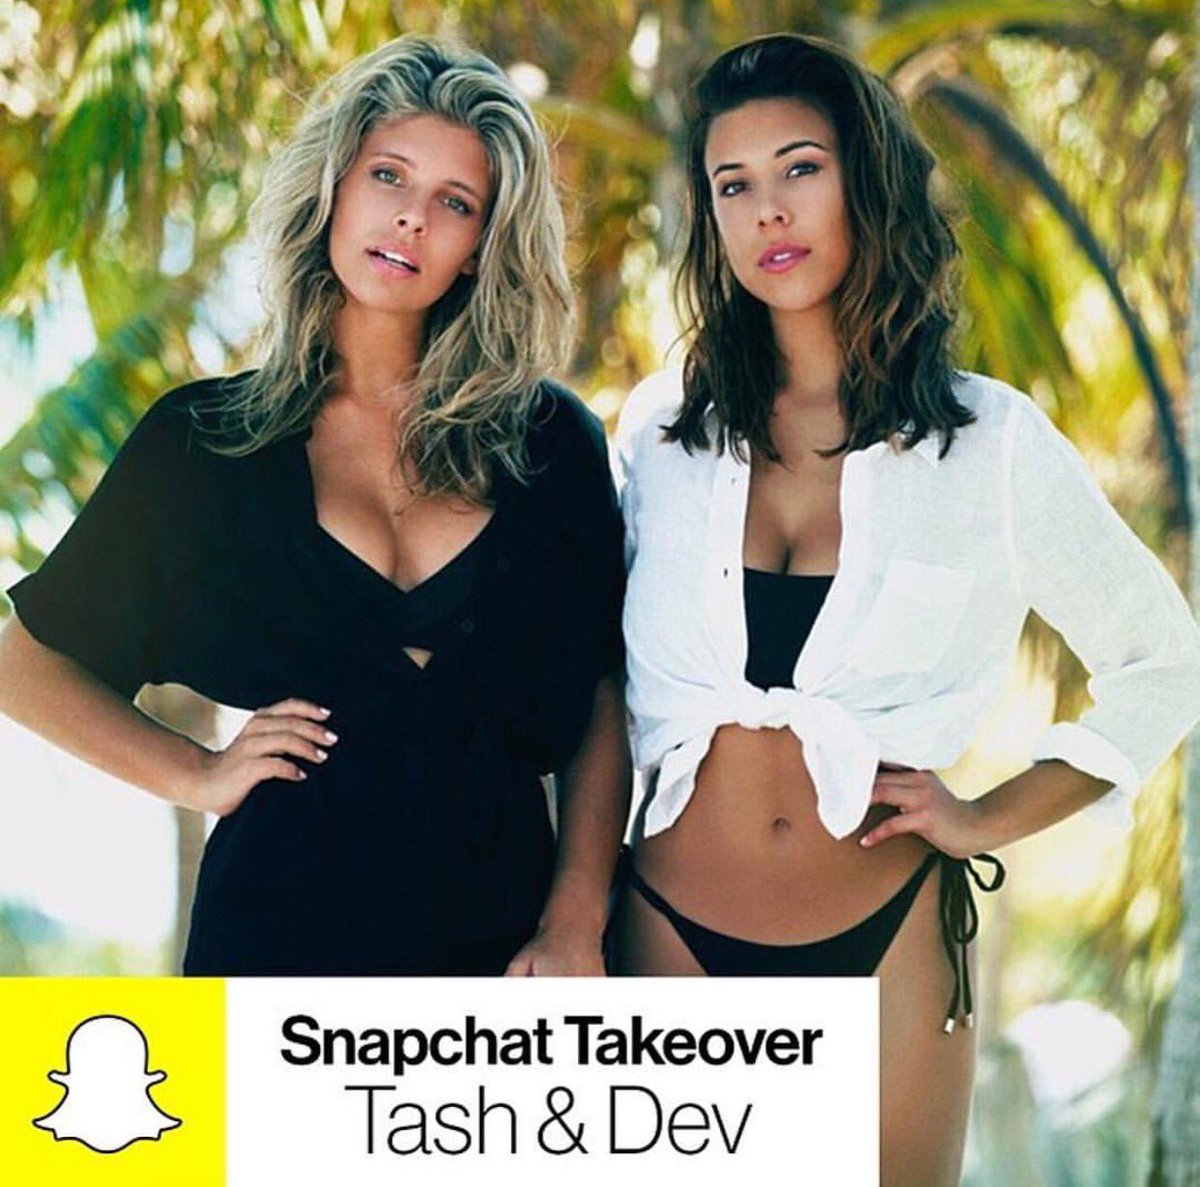 RT @ABikiniADay: Are you guys watching the @glamourmag snapchat? ????????????We've taken over!!! Follow them for a look into Miami Swim Week! https:…